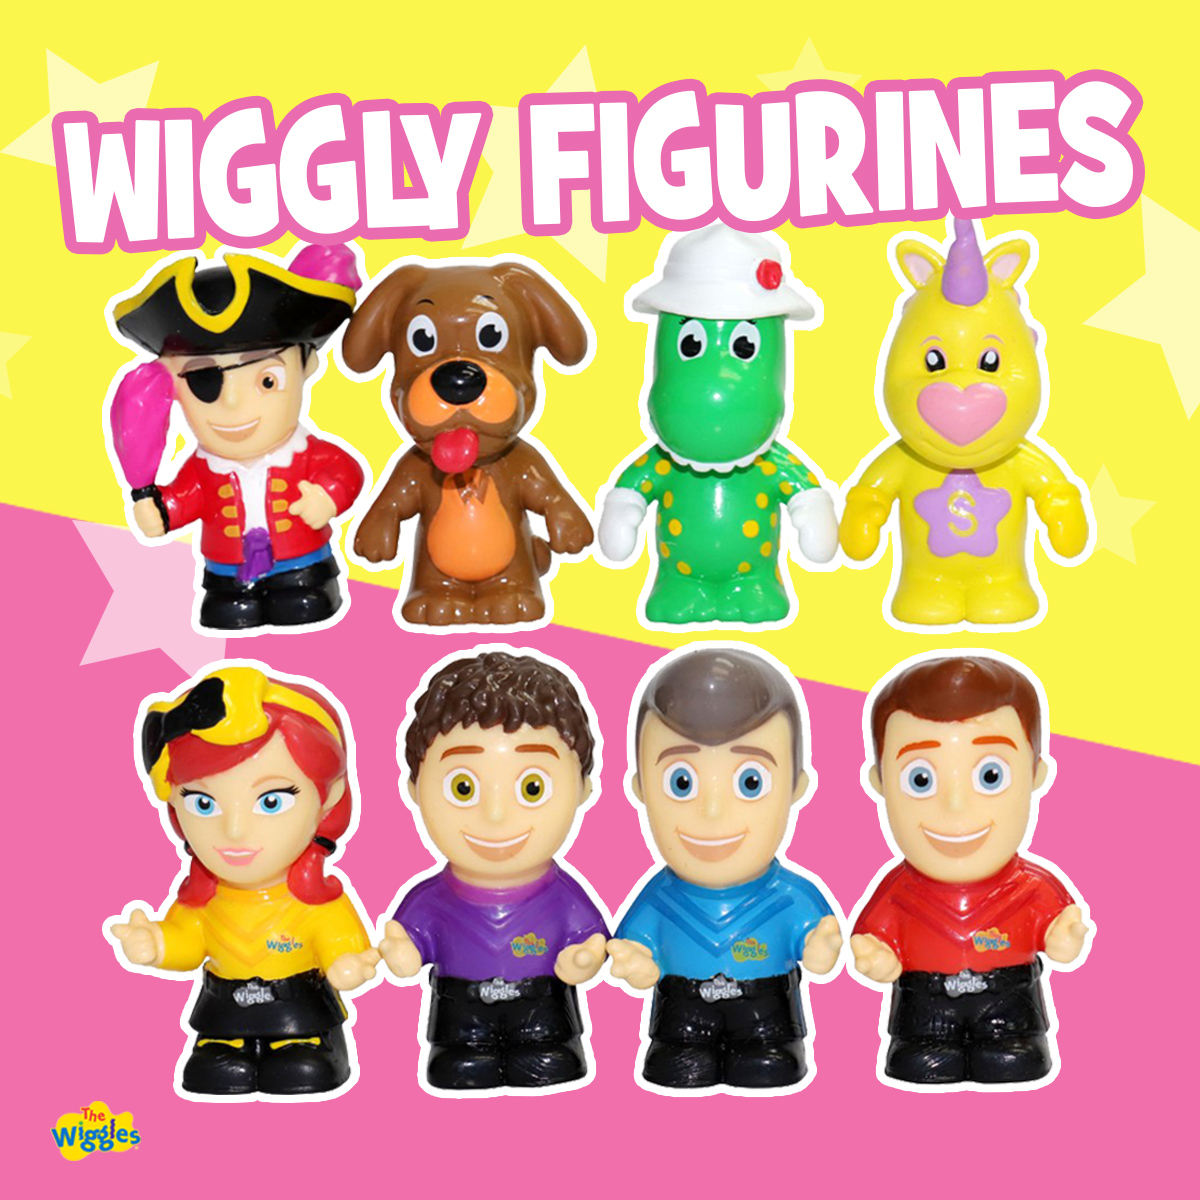 Wiggly Figurines 8 pack